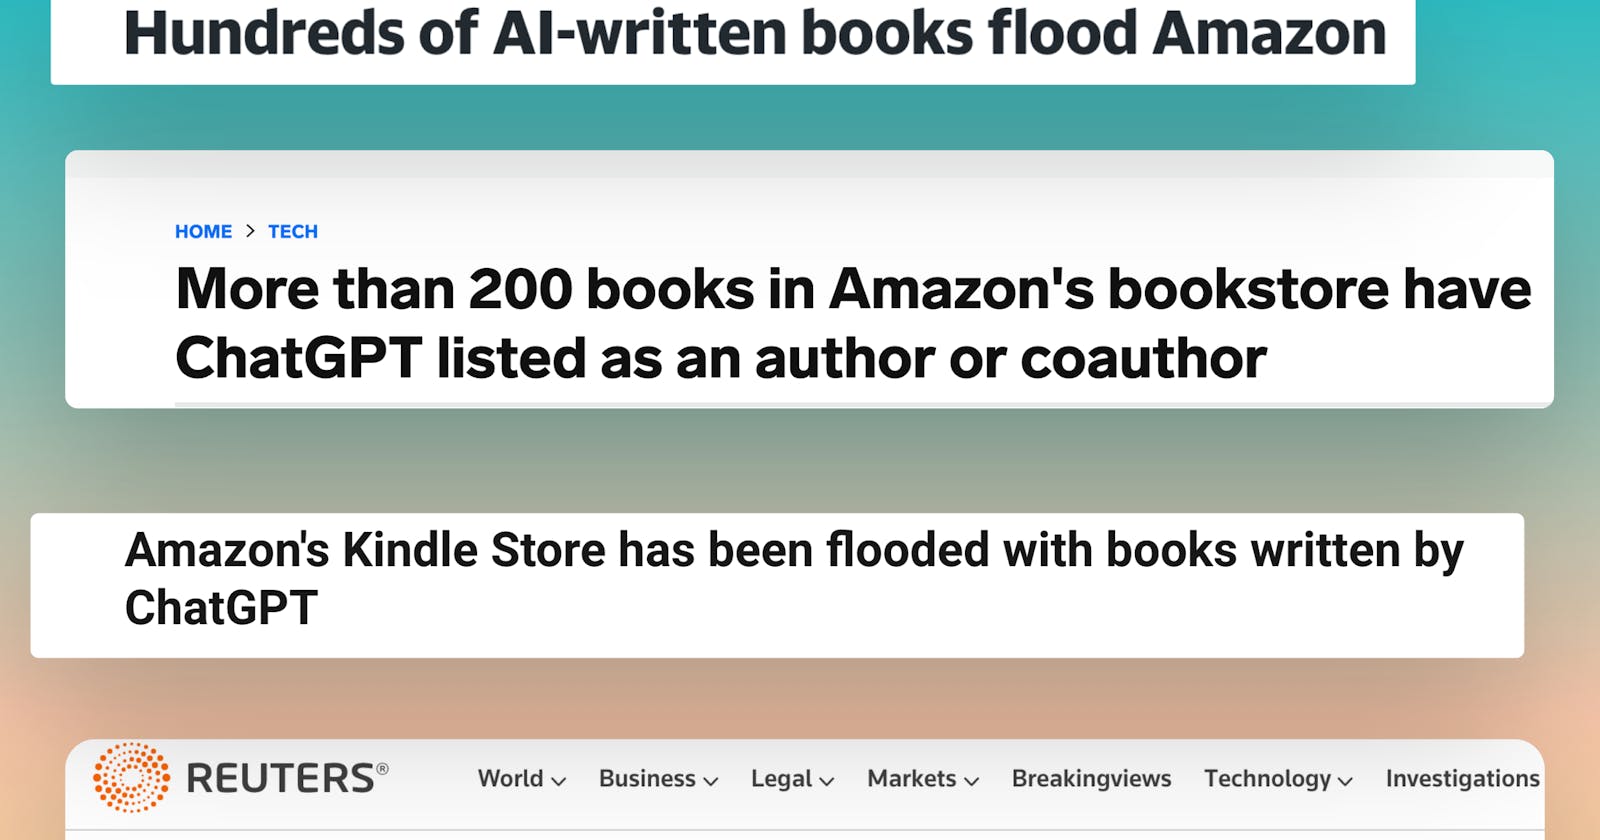 How to Become an AI Amazon Author in 30 days